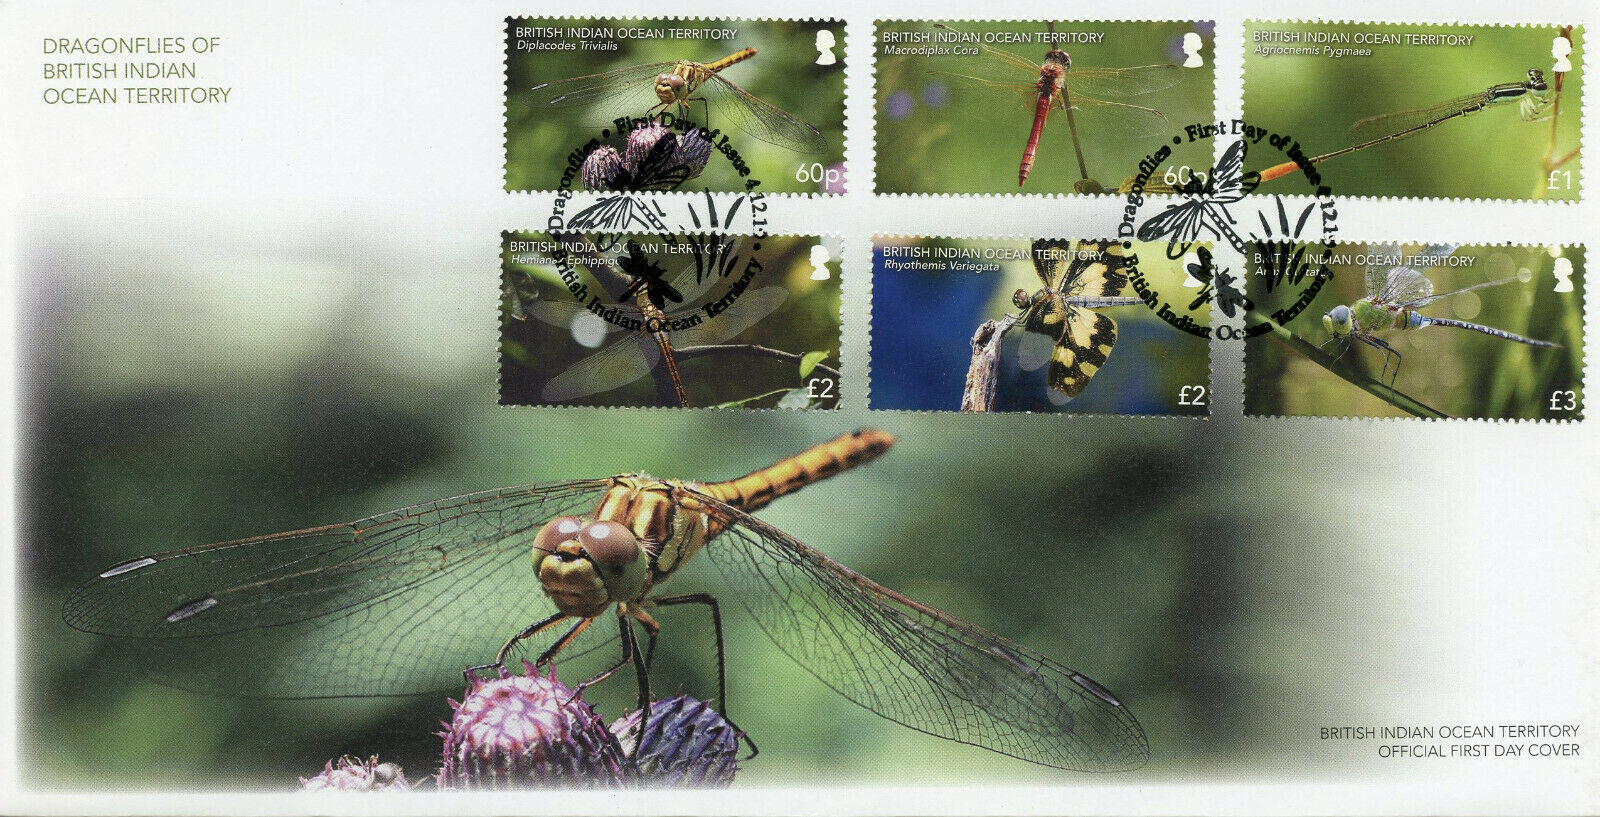 BIOT Brit Indian Ocean Terr Insects Stamps 2019 FDC Dragonflies Dragonfly 6v Set